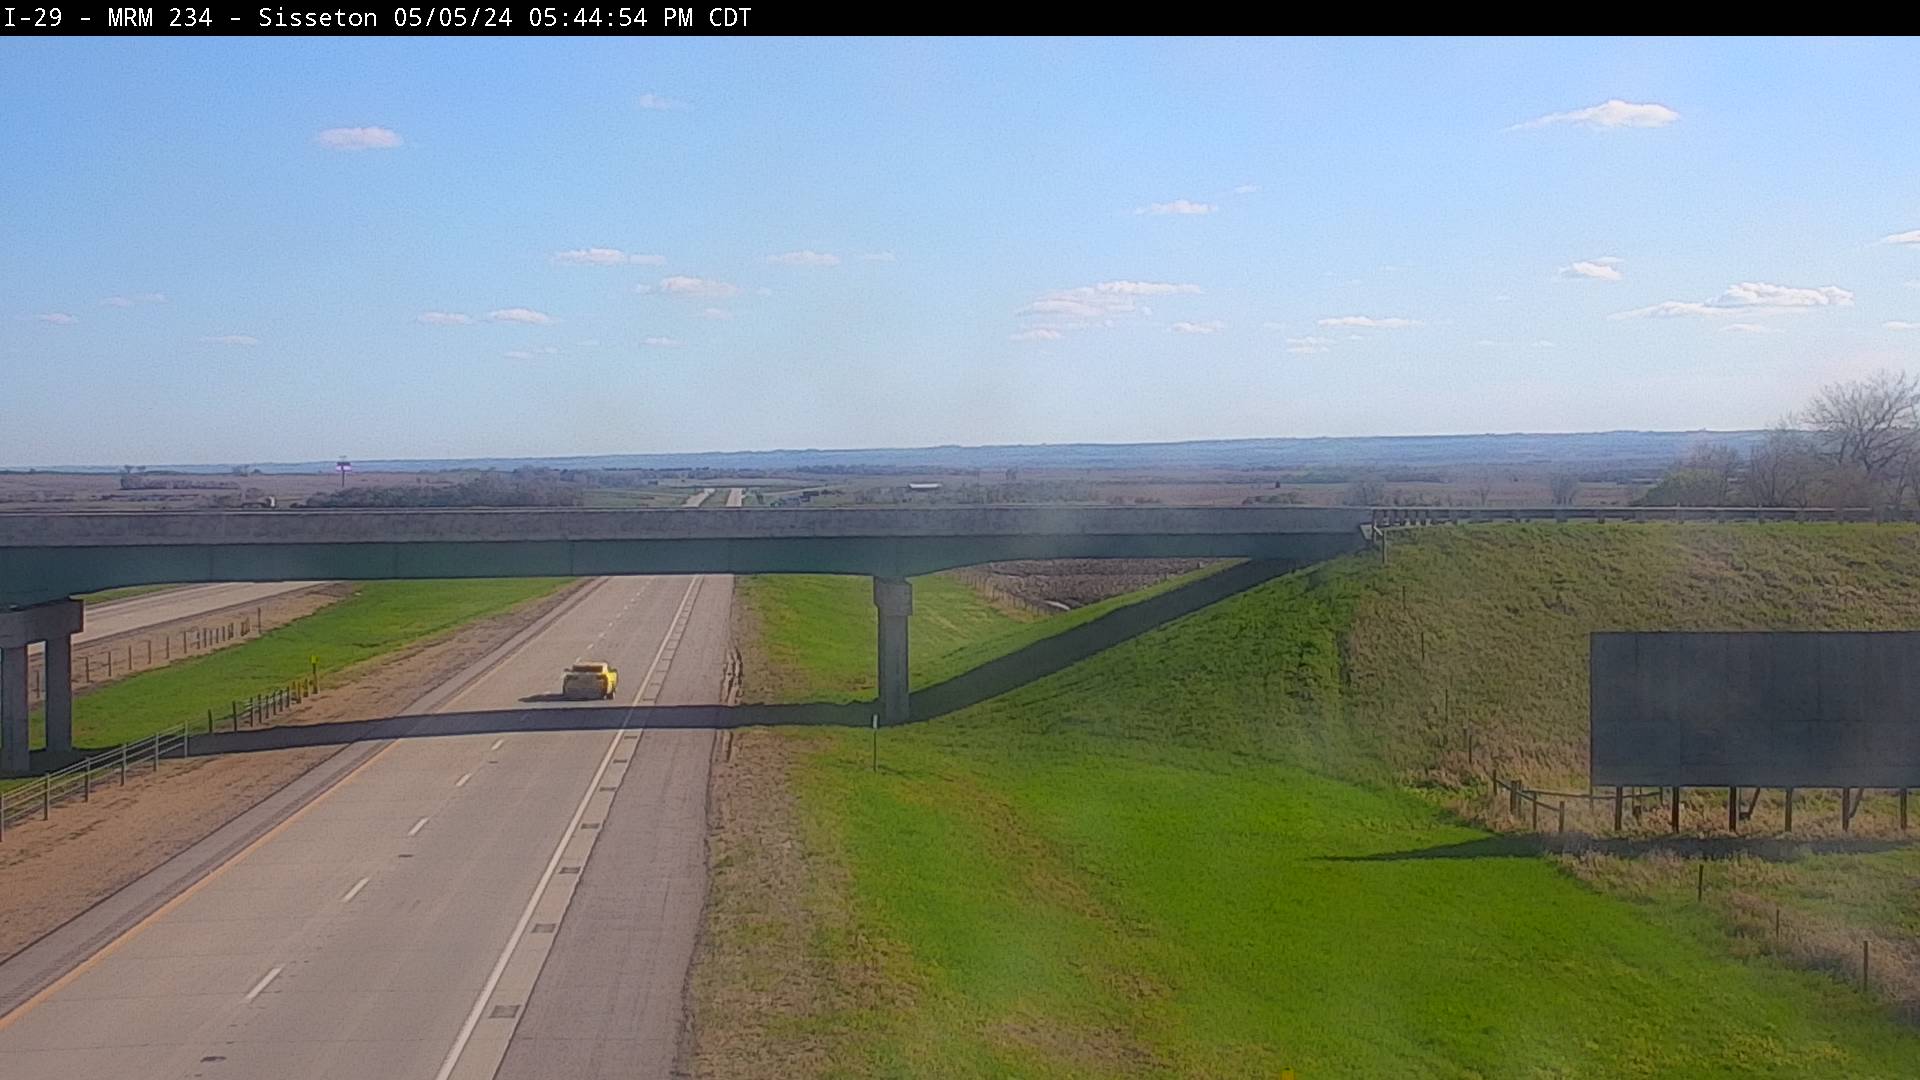 Traffic Cam North of town along I-29 @ MP 234 - South Player